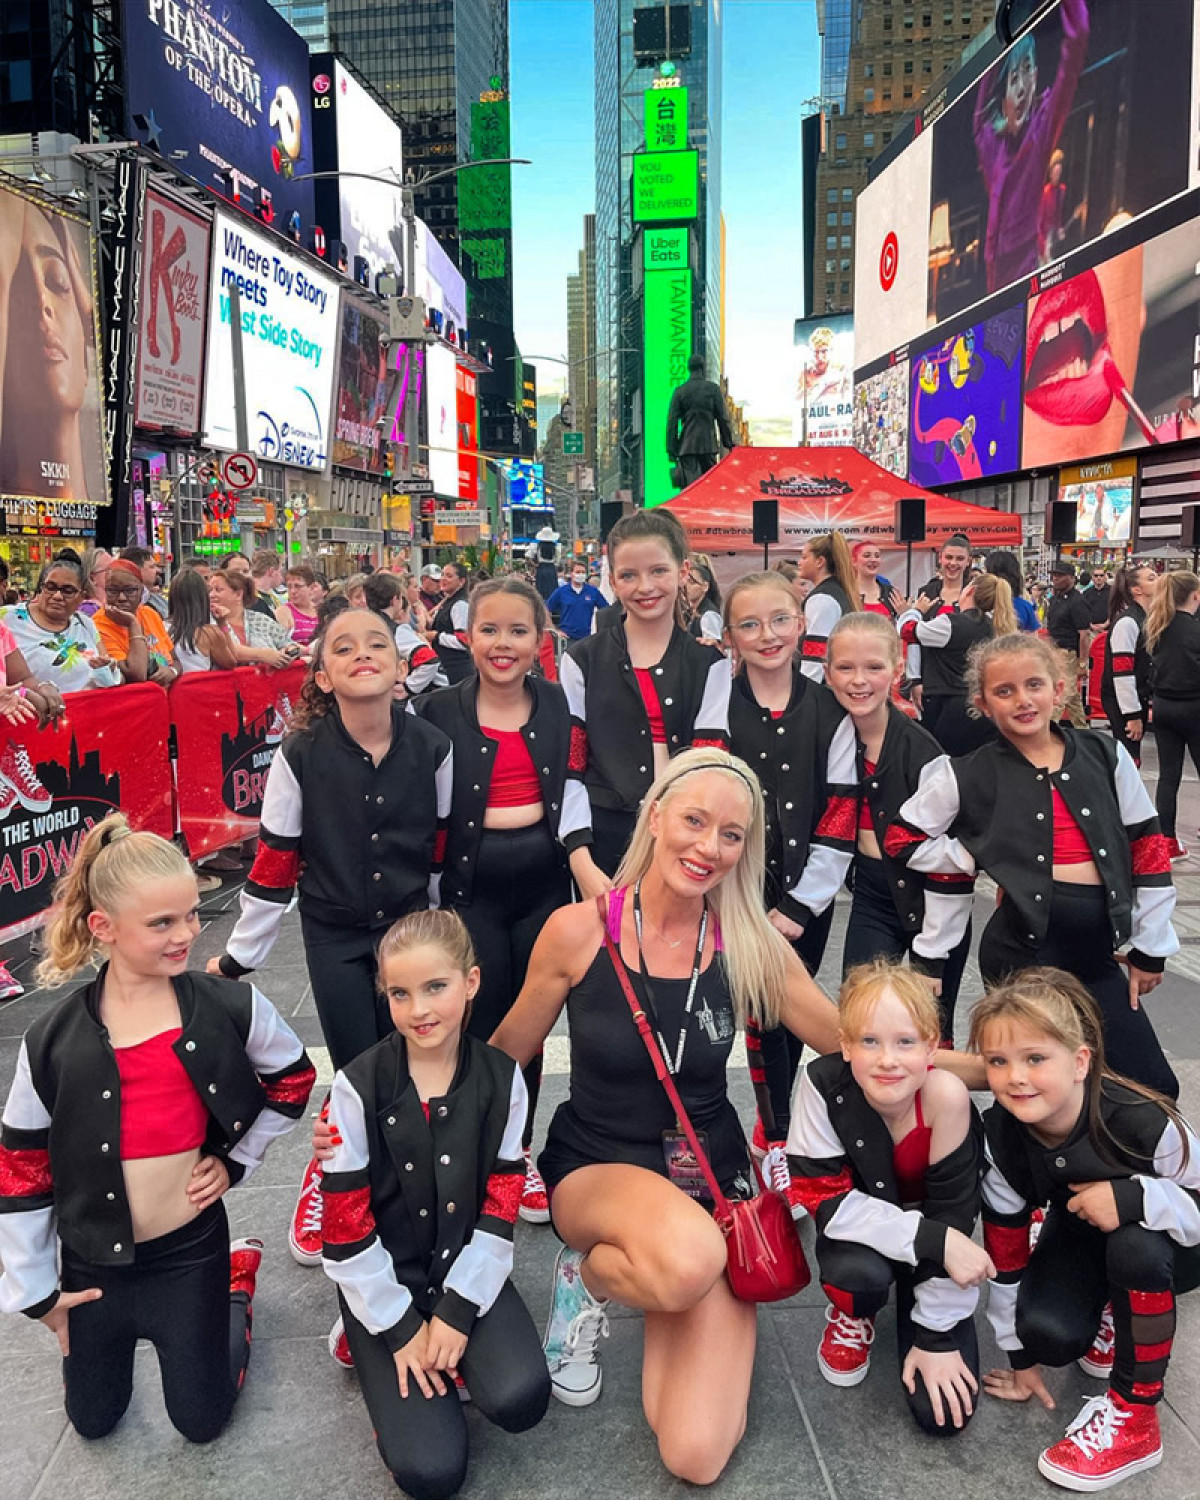 Dance troupe in Times Square New York